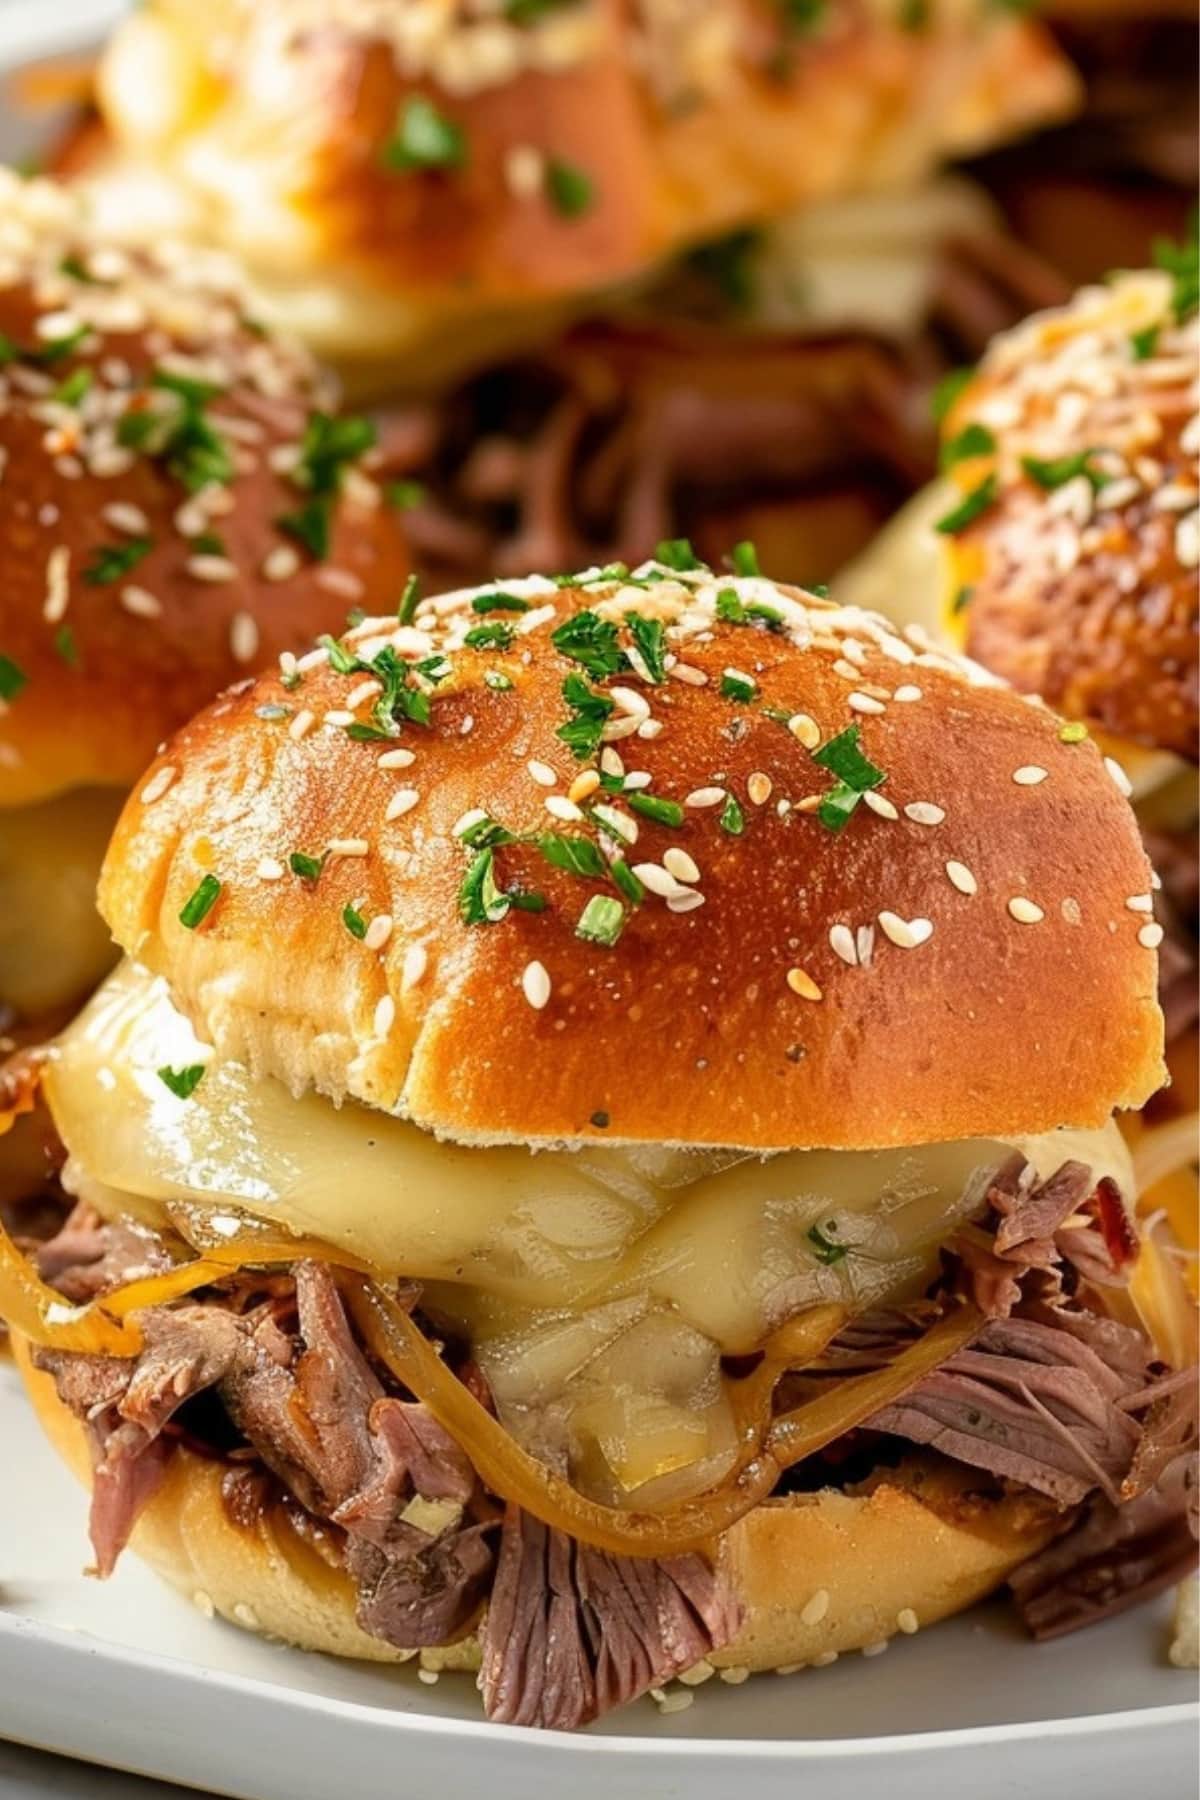 French dip sliders with roast beef, caramelized onion and cheese filling in a wooden board.